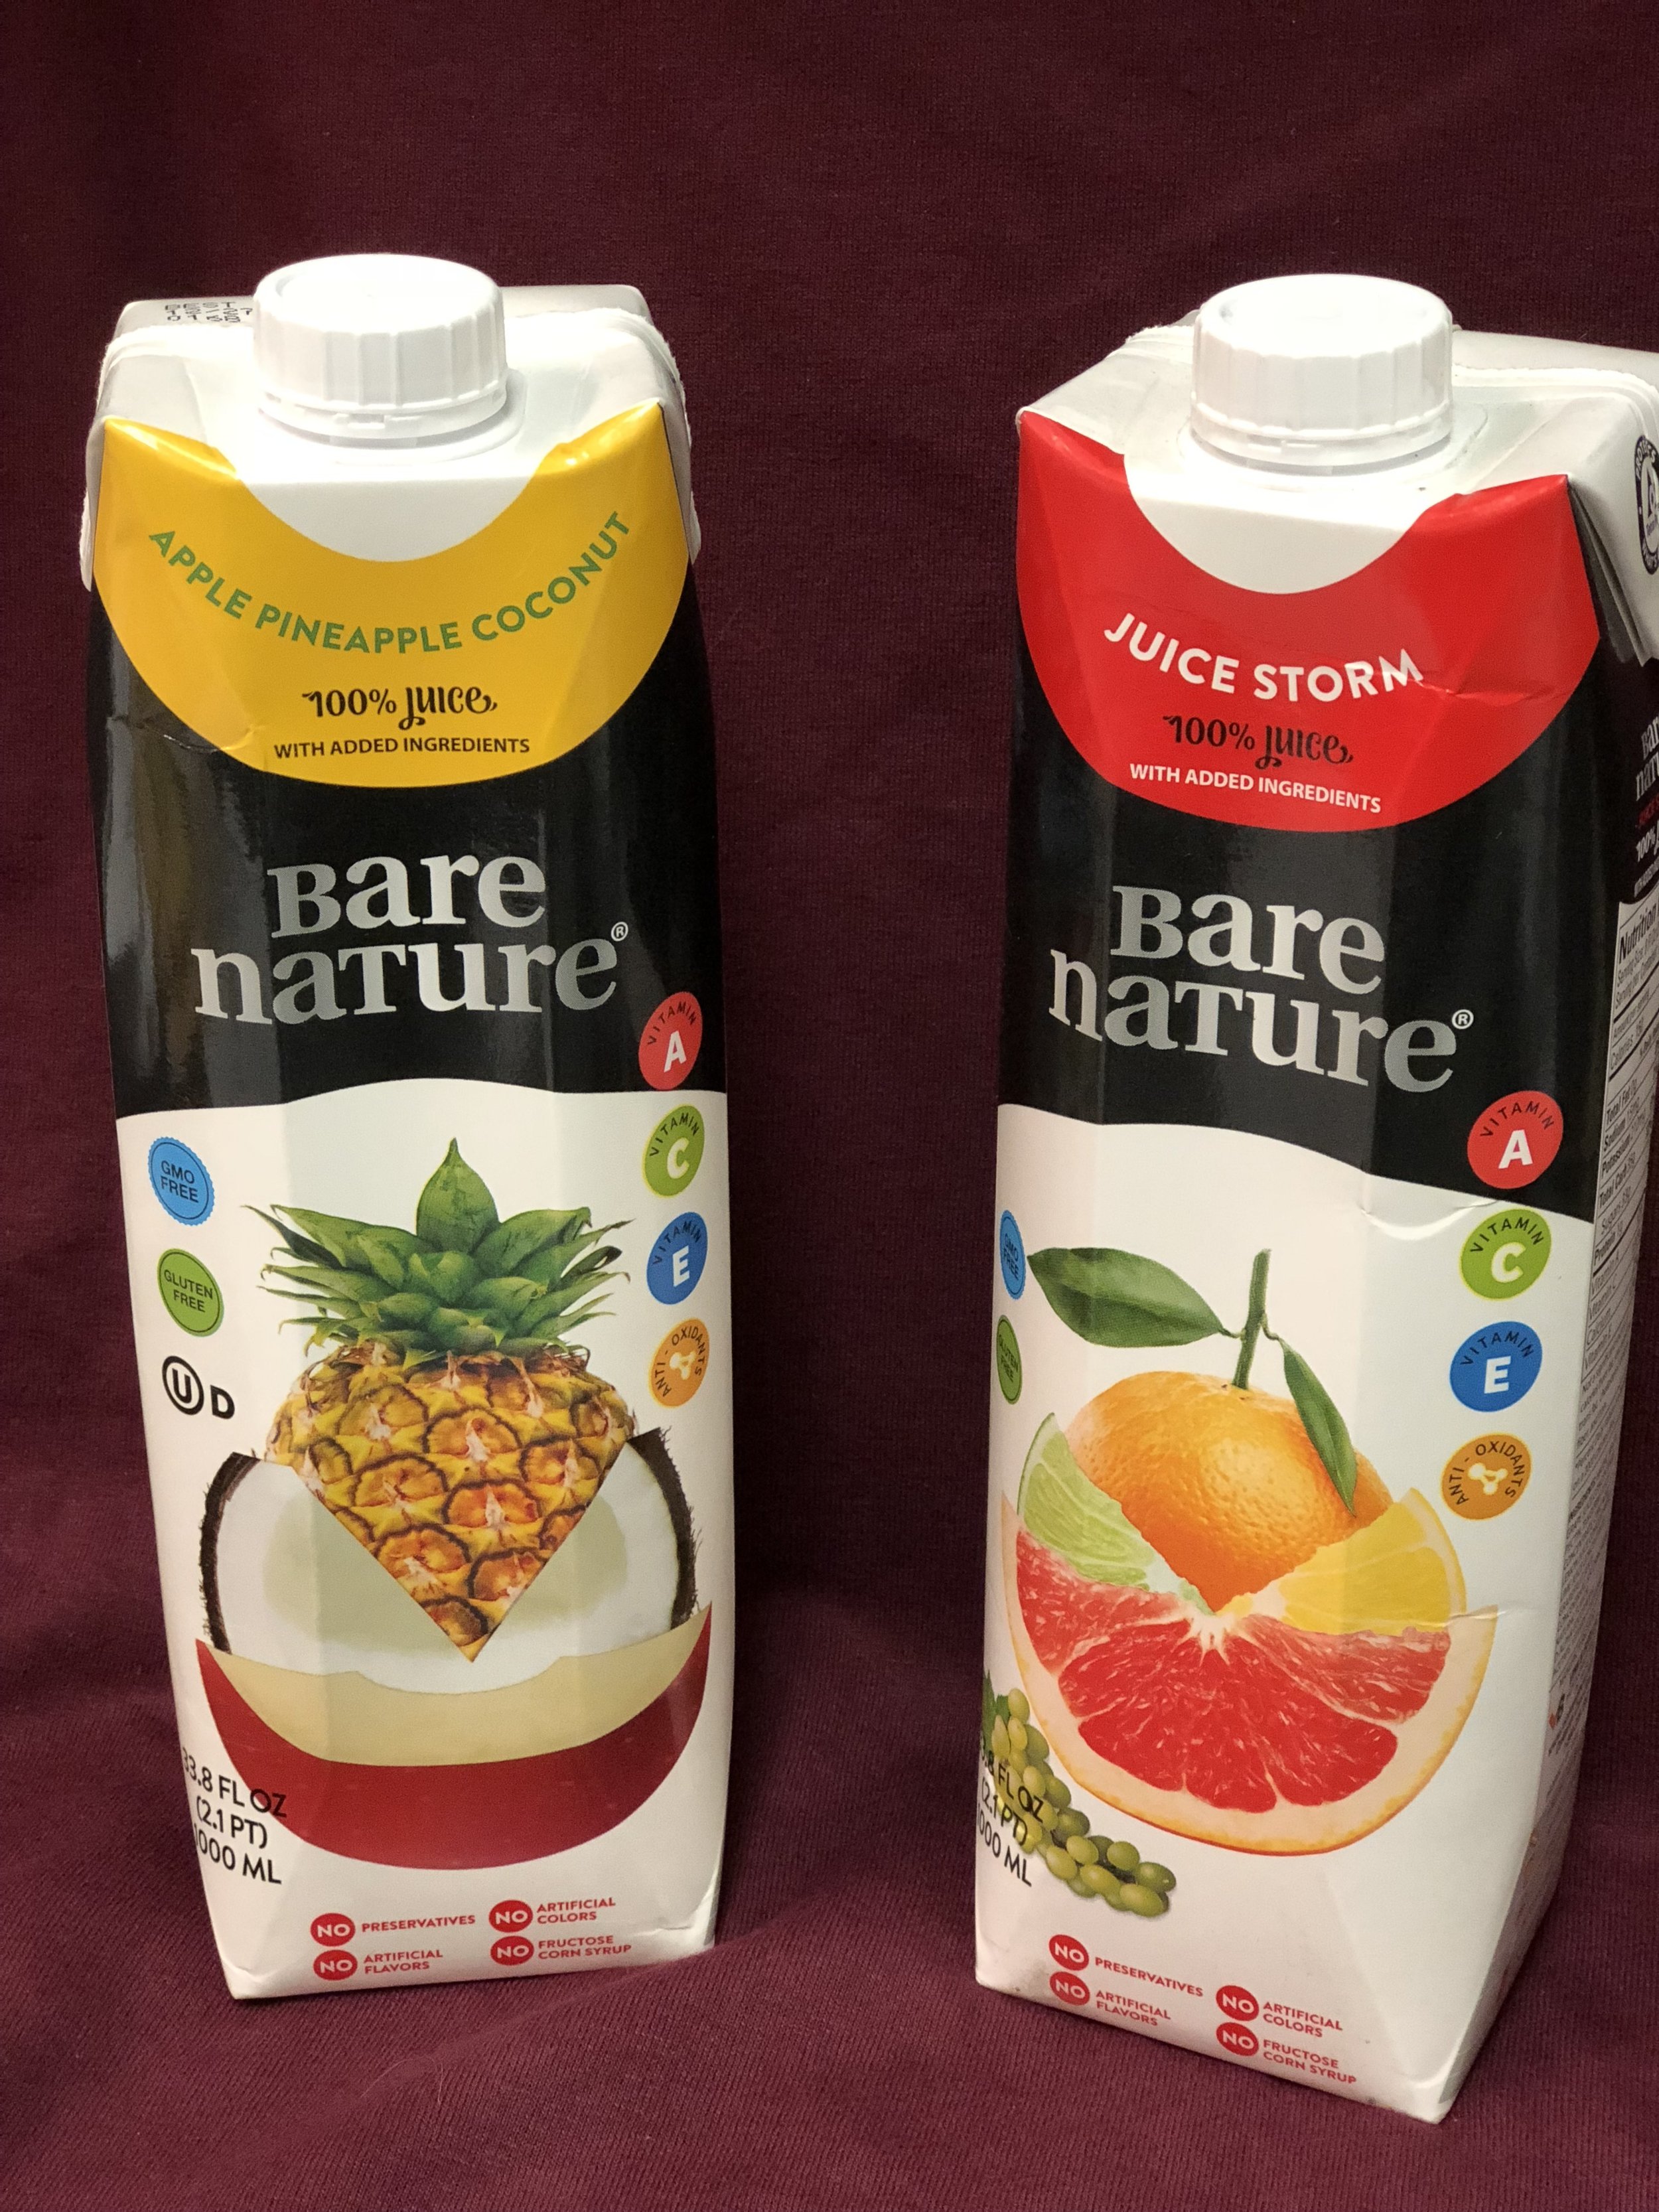 Bare Nature Juices